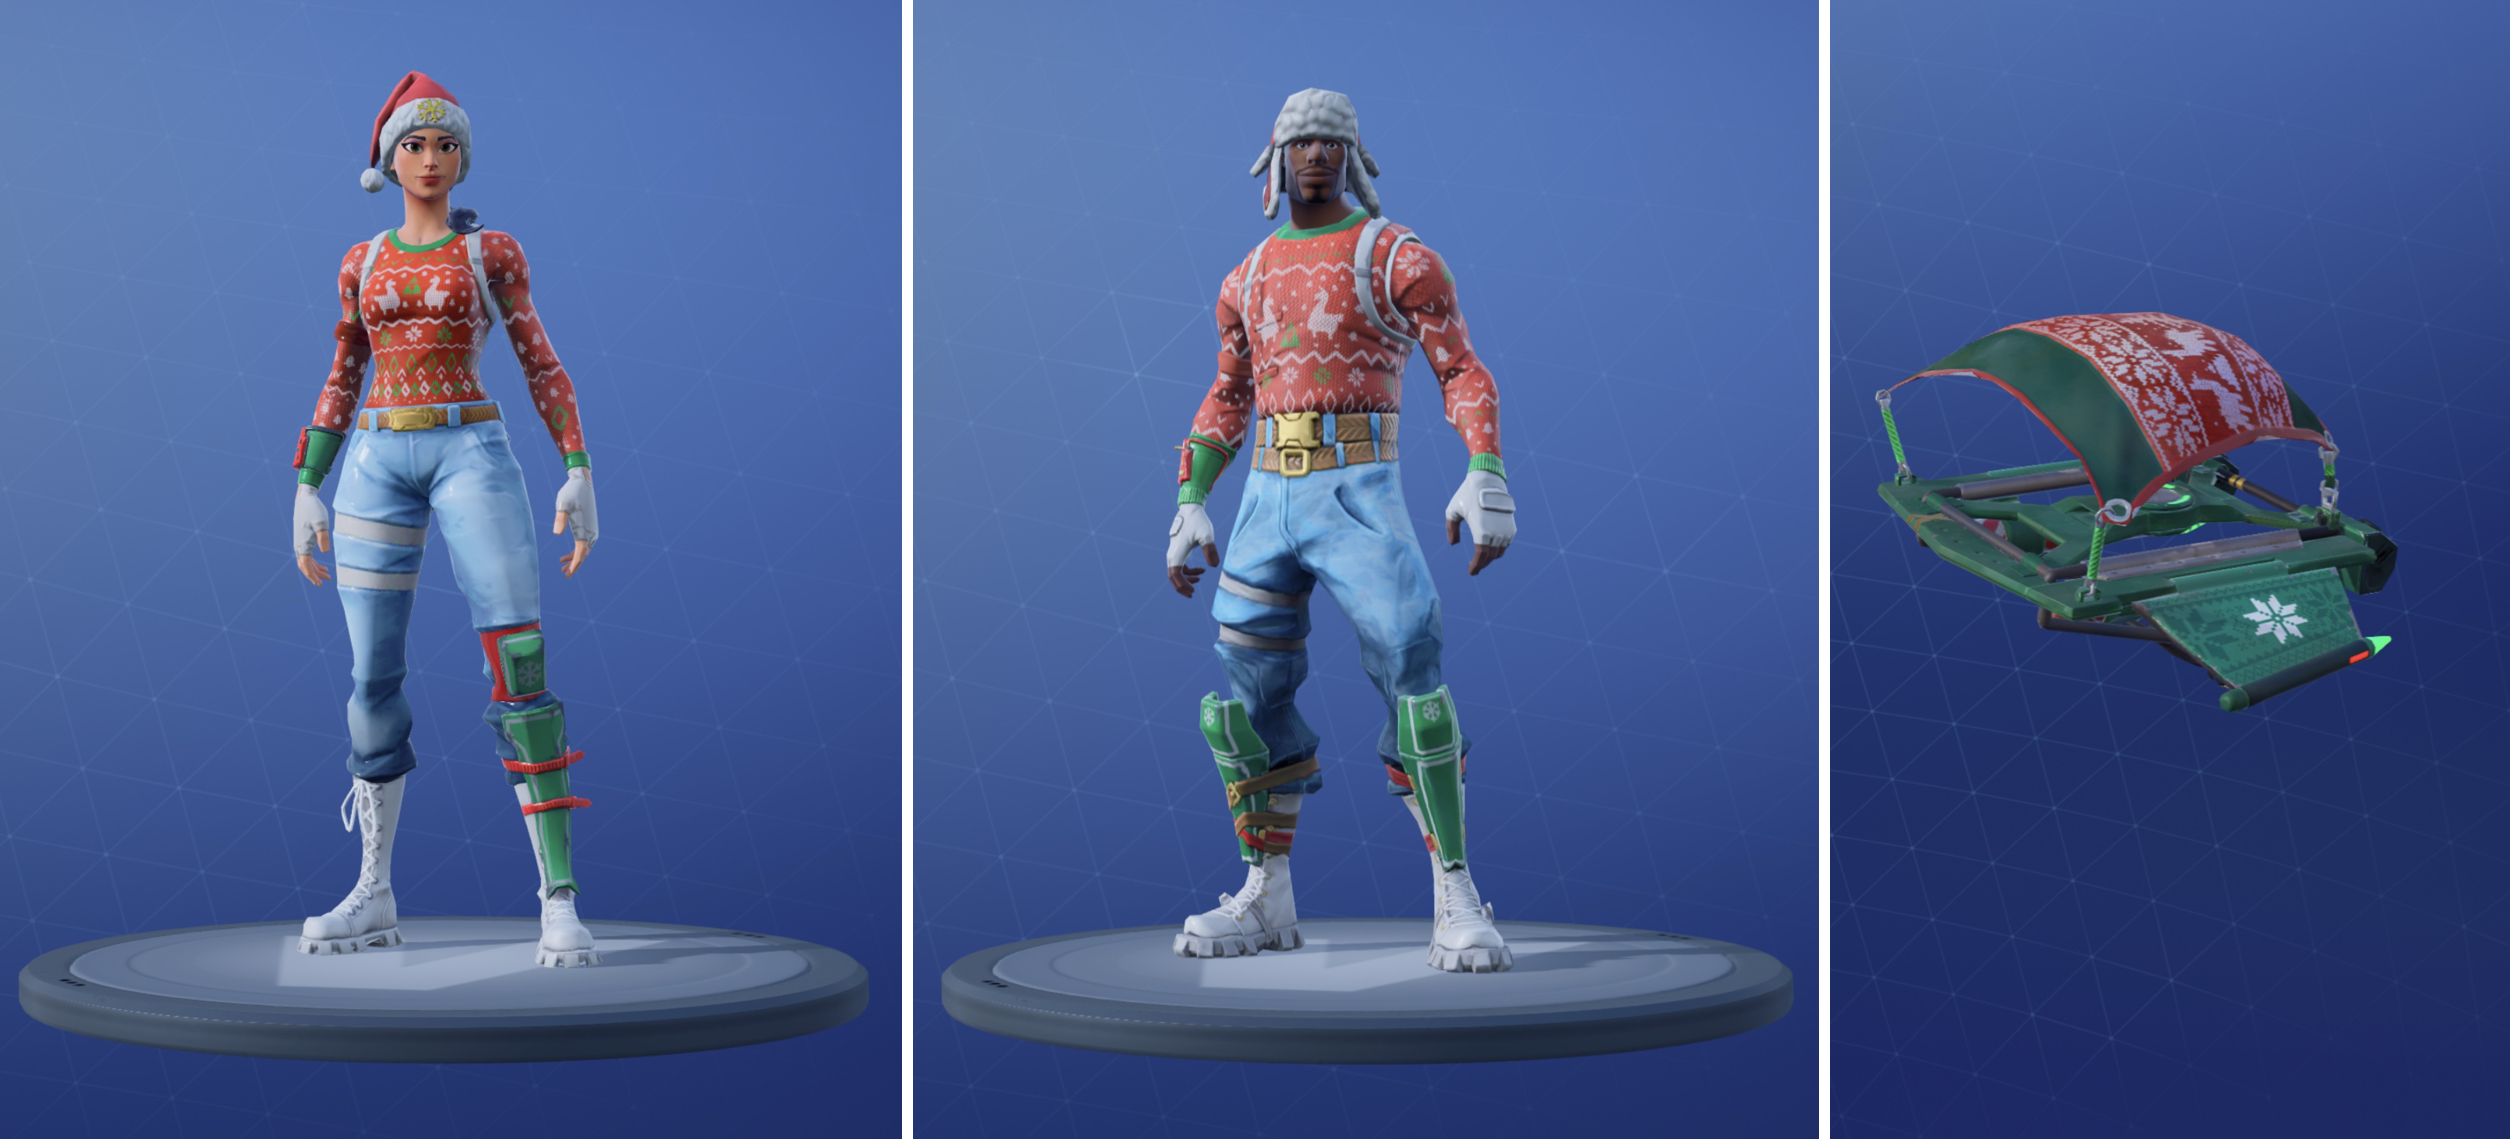 Christmas Comes Early With New Fortnite Skins